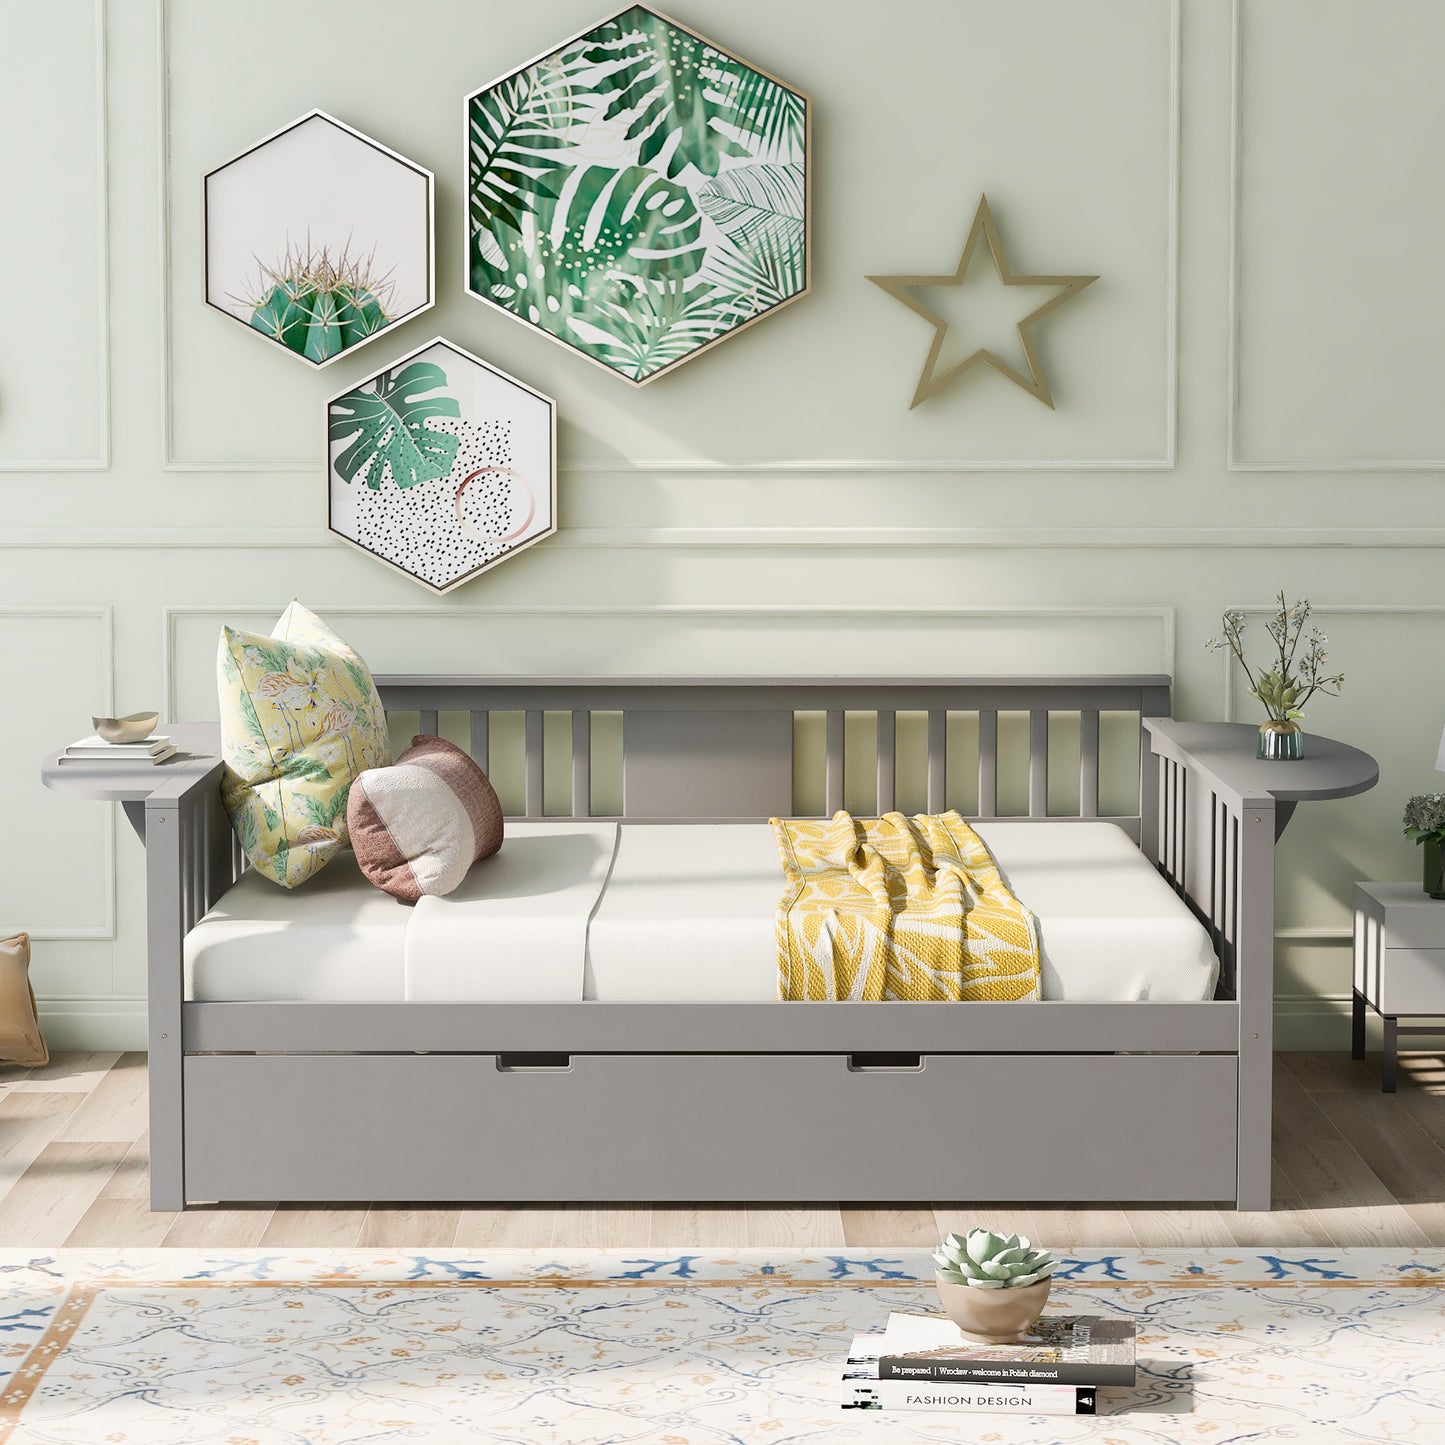 Full size Daybed with Twin size Trundle, Wood Slat Support, Gray